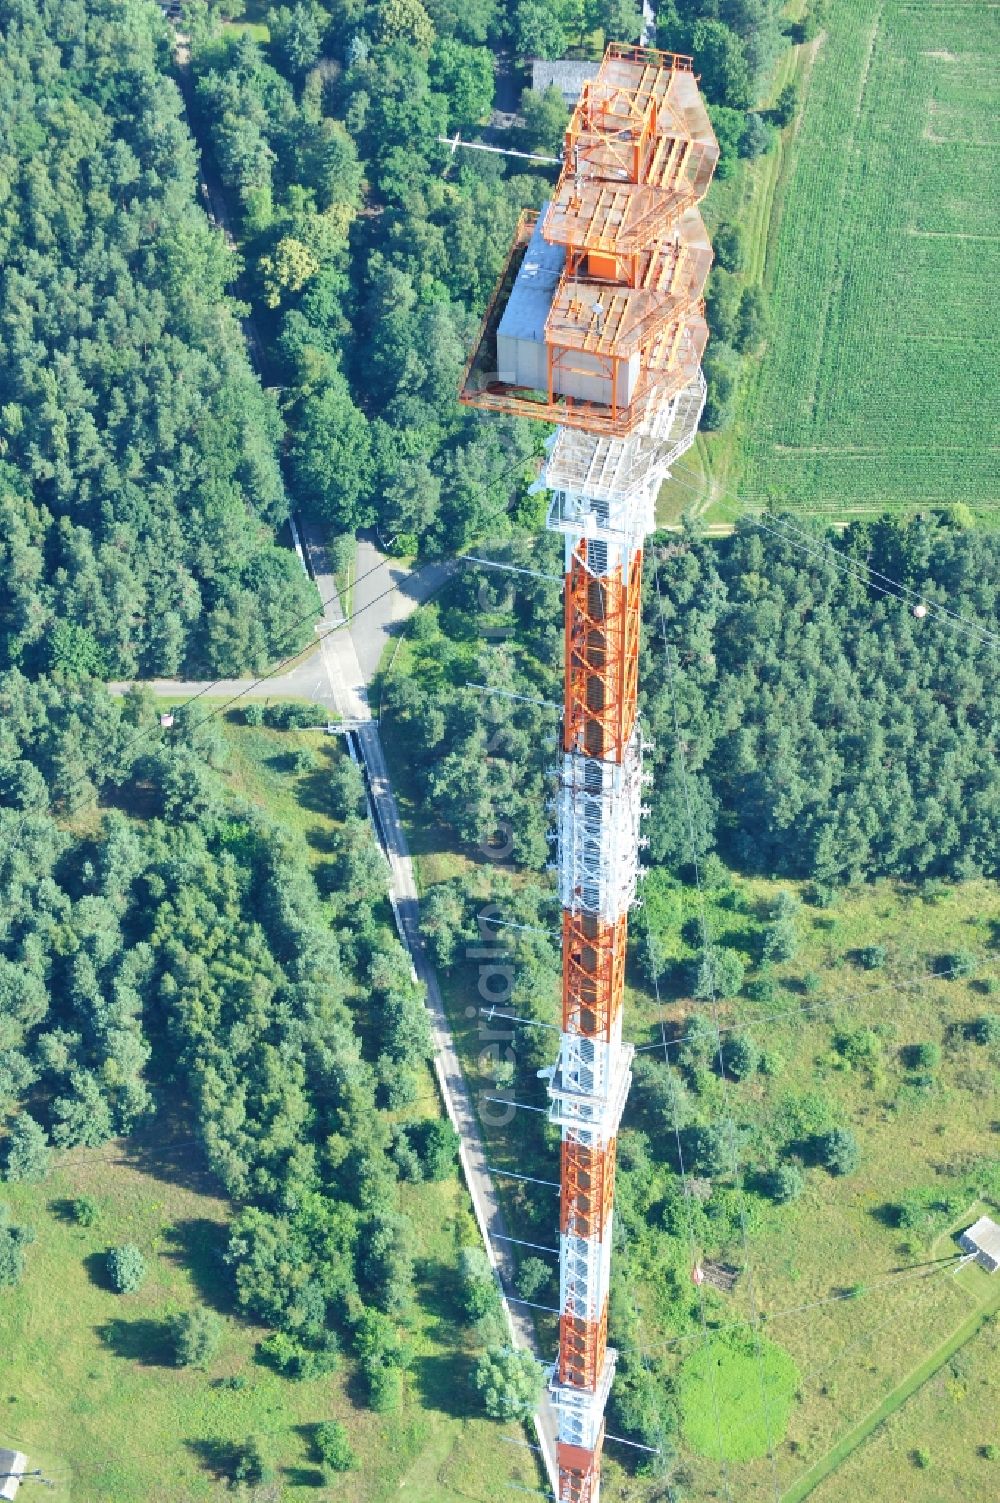 Dannenberg from above - The radio tower at Höhbeck Dannenberg in Lower Saxony